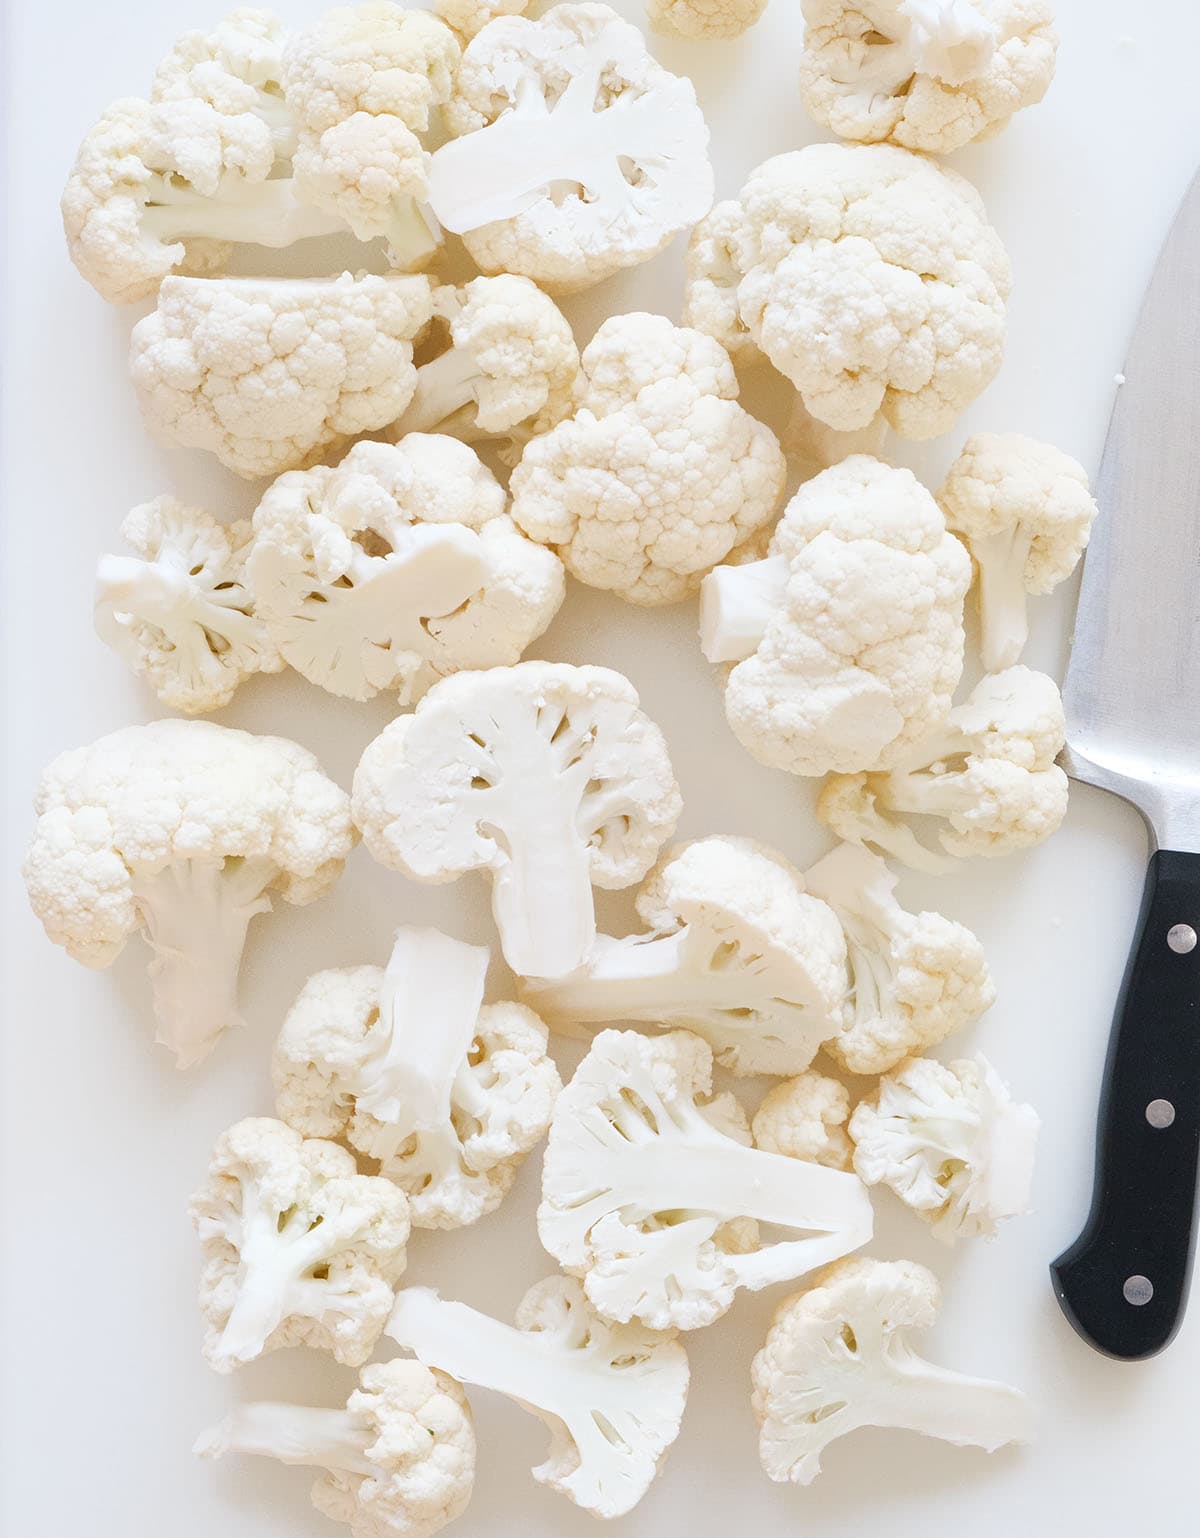 Top view of a fresh cauliflower cut into florets over a white background.